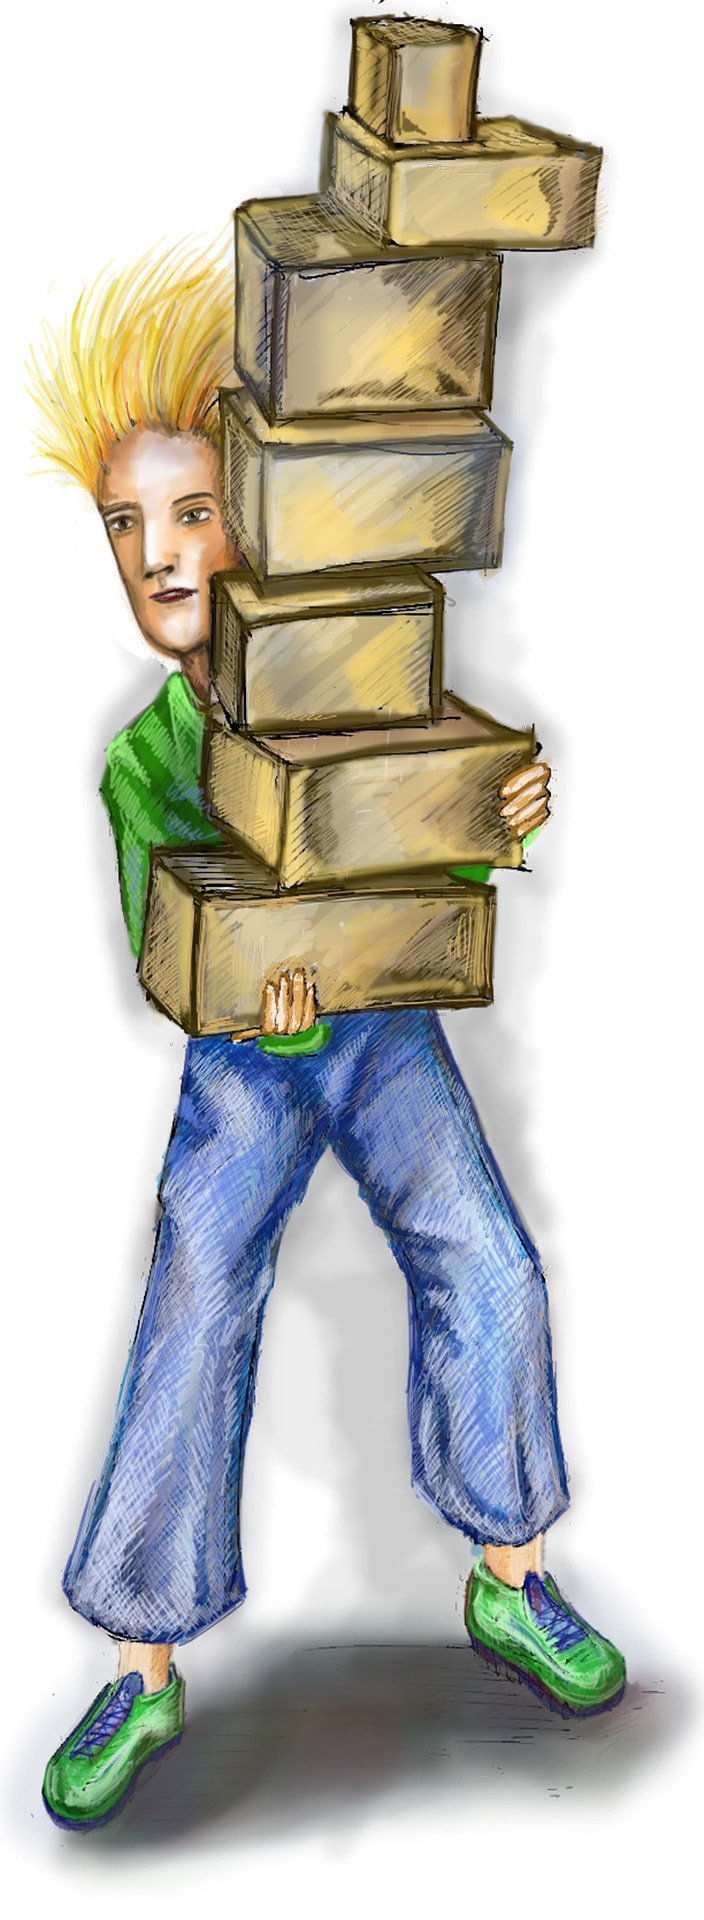 Drawing of man bearing packages about to fall